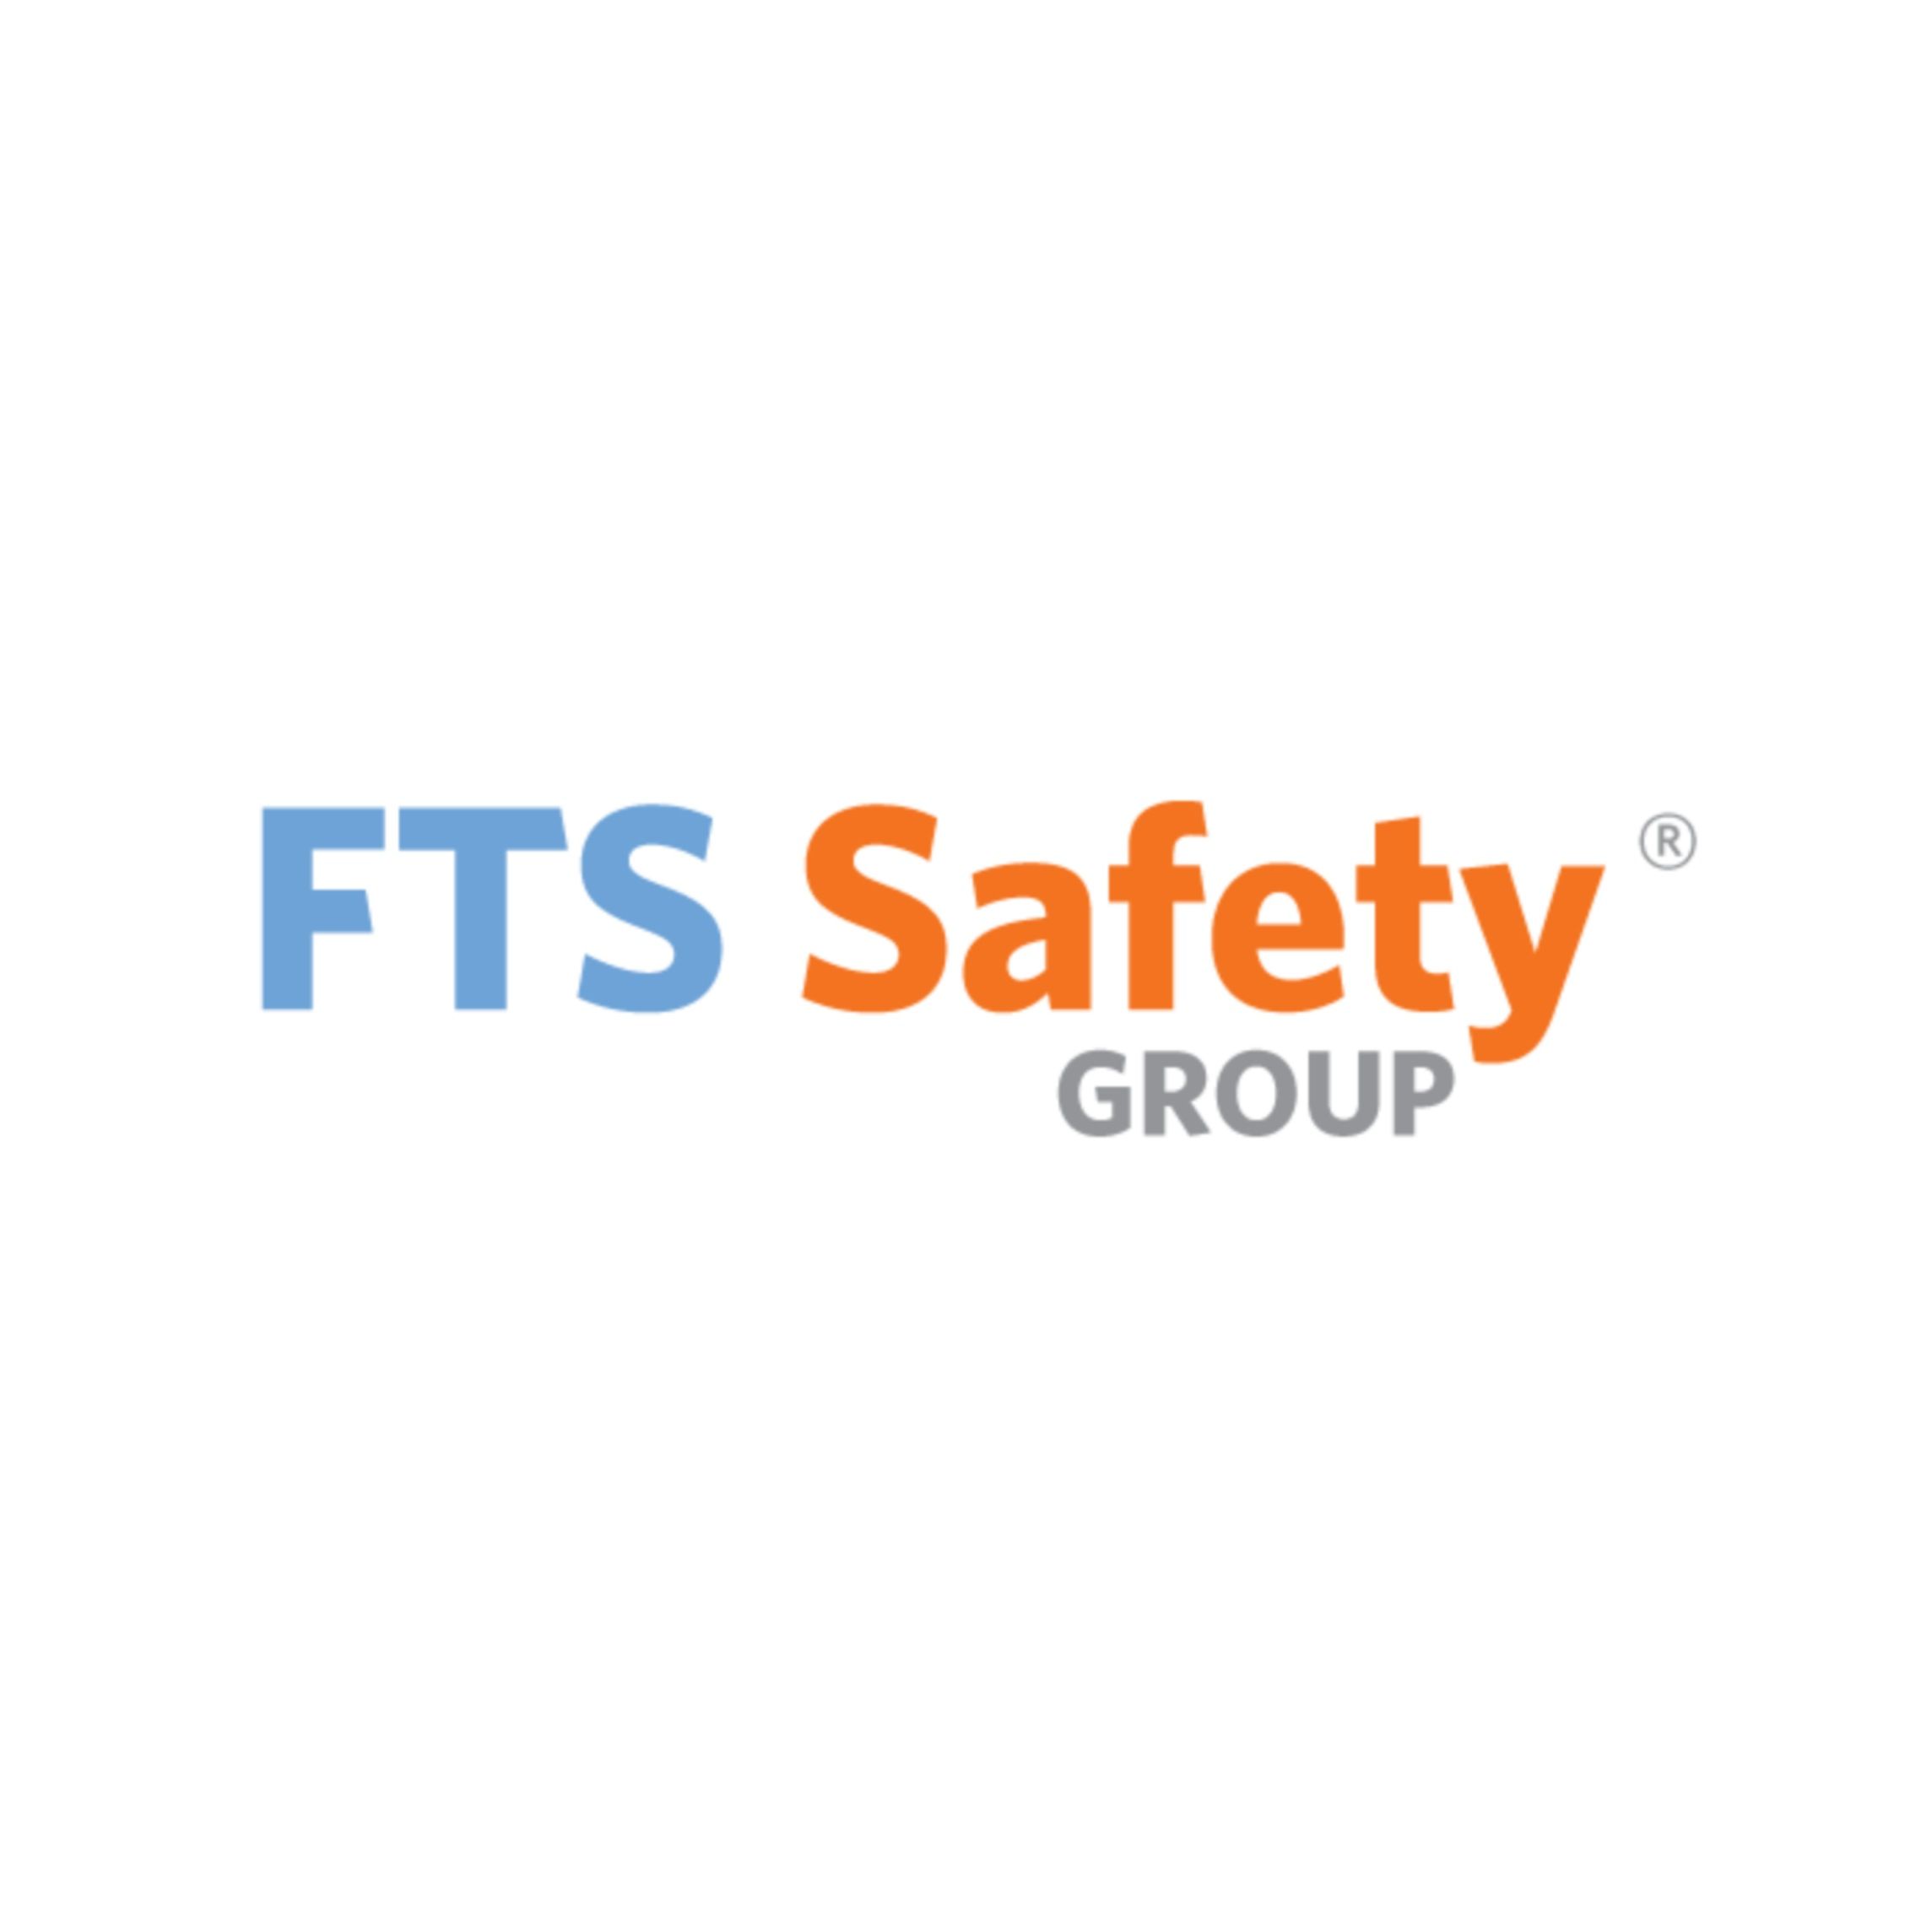 FTS Safety Group